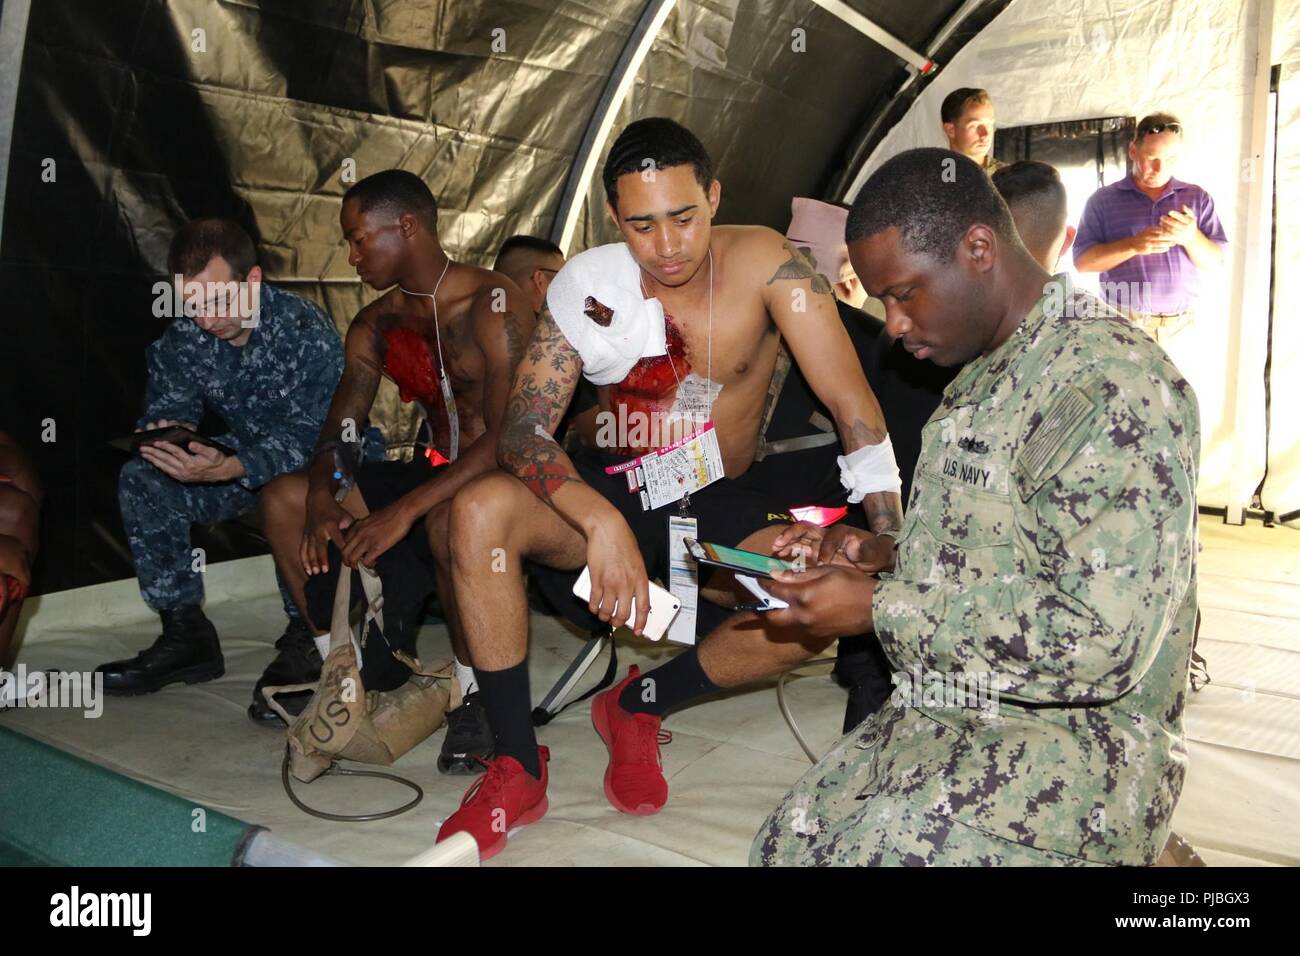 JOINT BASE PEARL HARBOR-HICKAM, Hawaii (July, 12, 2018) U.S. Army Spc. Jaylen Jones, 84th Engineer Batallion Soldier and patient actor, sports a mock impalement while providing simulated medical information to Petty Officer 2nd Class James Farrington III, a corpsman at the Naval Health Clinic Hawaii, who is testing out a new electronic medical record system designed to virtually document medical encounters in the field environment. The mock scenario is part of the U.S. Navy’s Rim of the Pacific exercise, as part of the humanitarian assistance and disaster relief portion of the training event.  Stock Photo